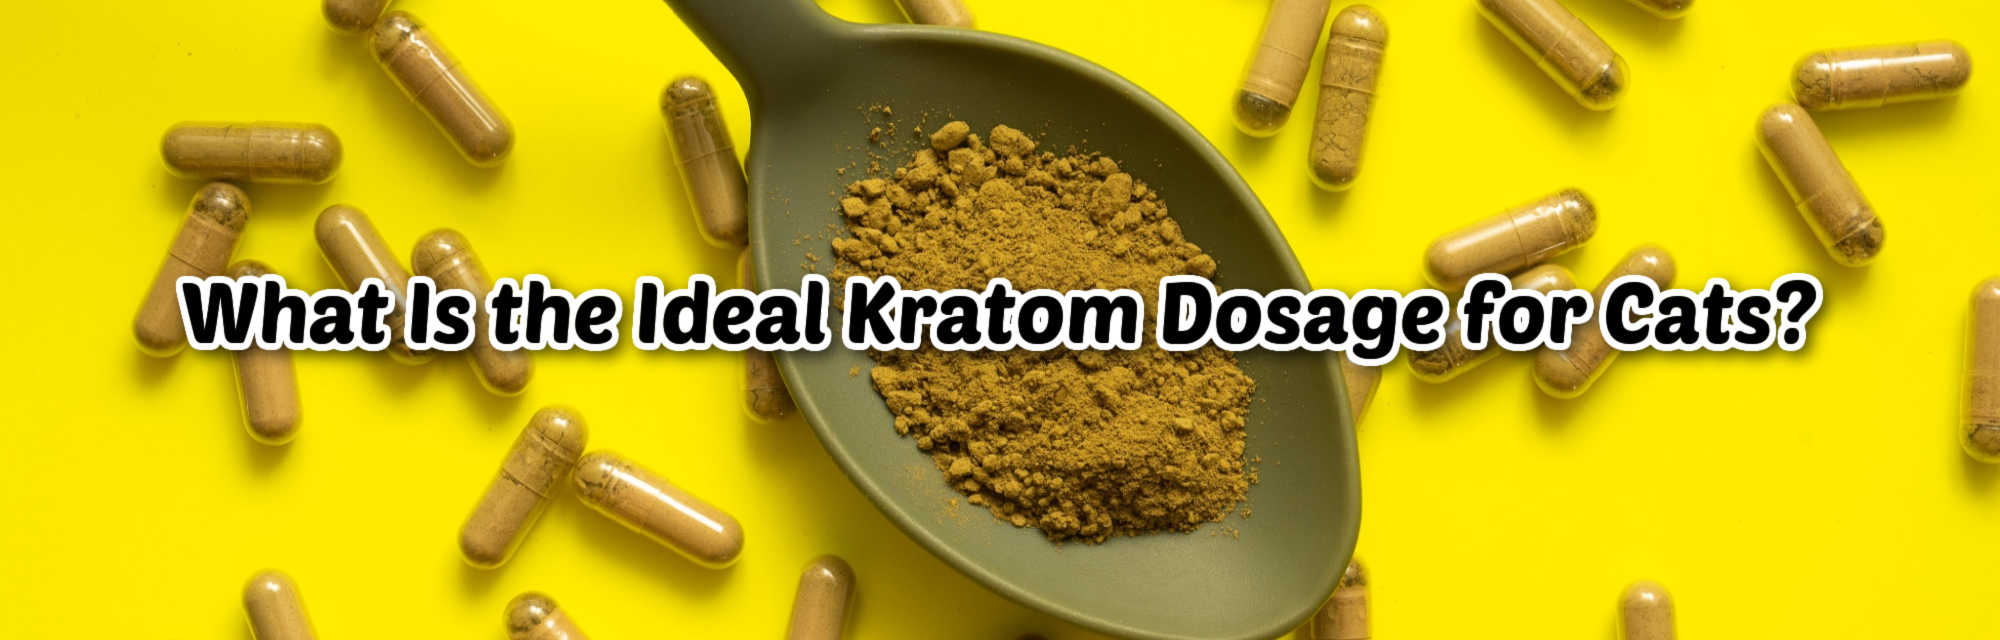 image of ideal kratom dosages for cats